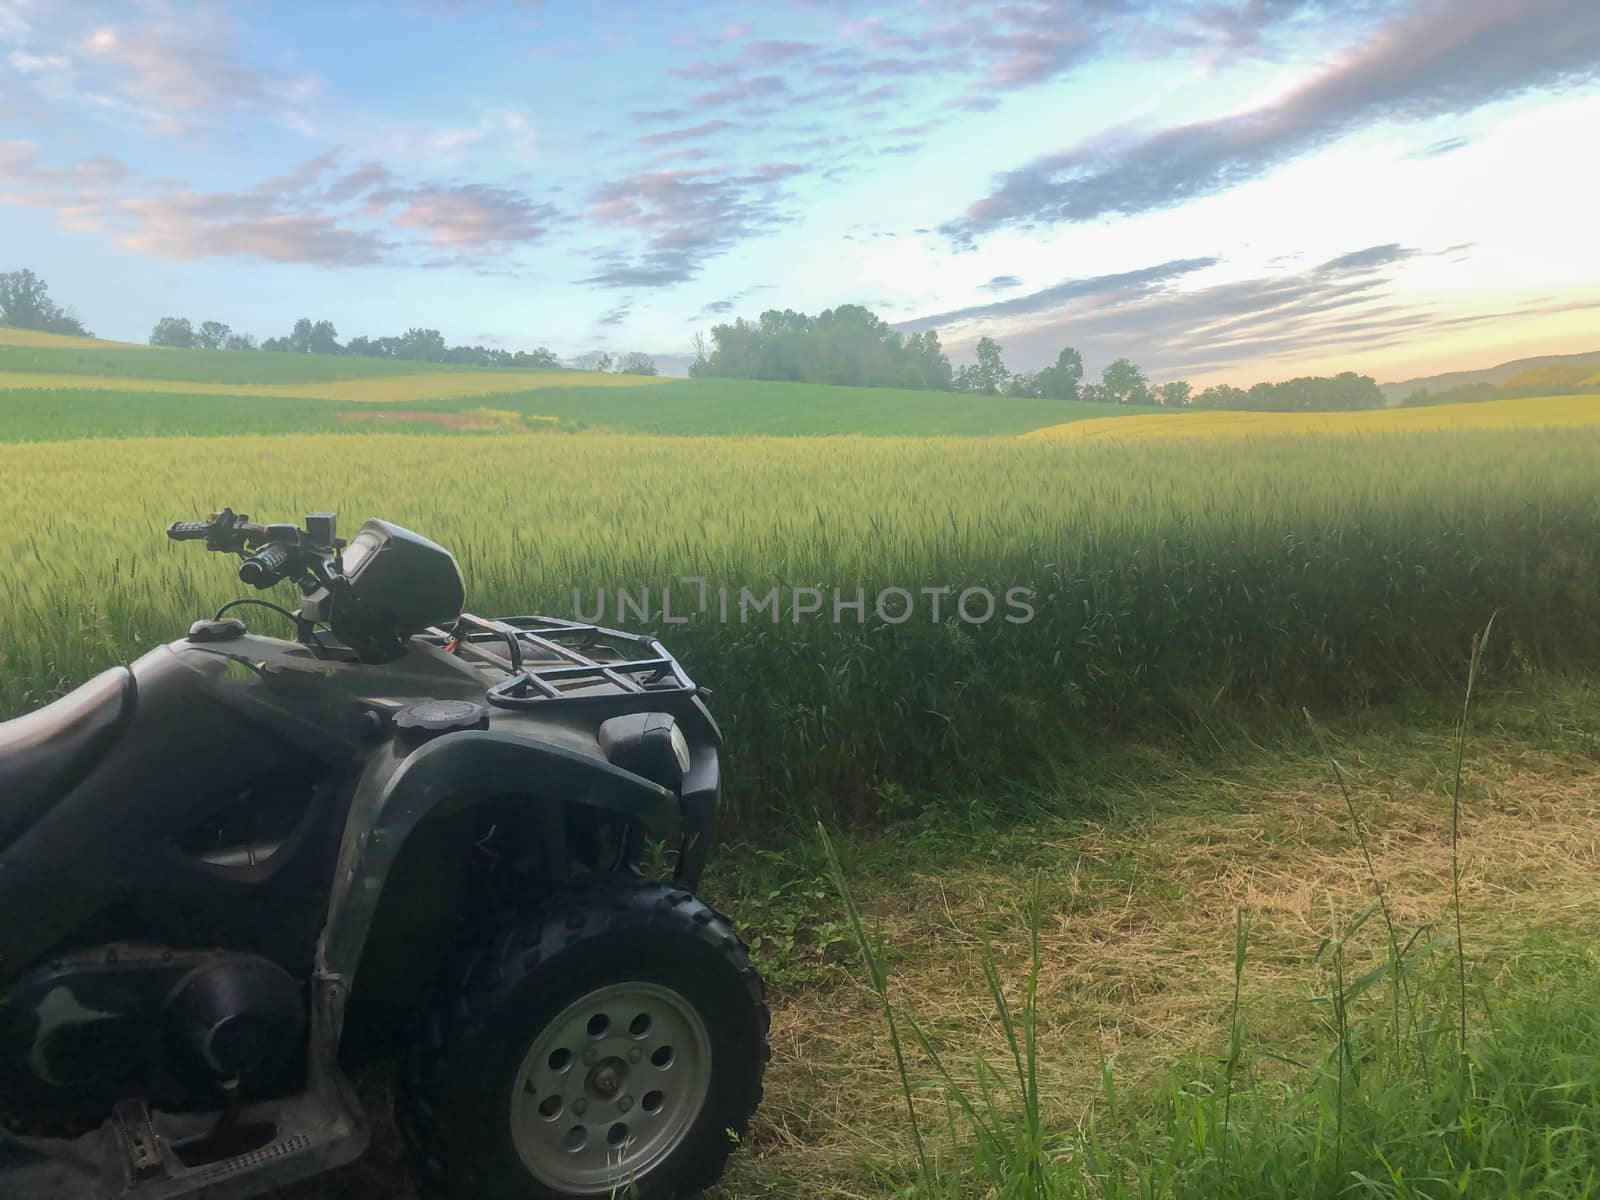 Golden hour rural landscape with off road vehicle in foreground, serene colors and textures to the horizon with a pink sky and copy space.